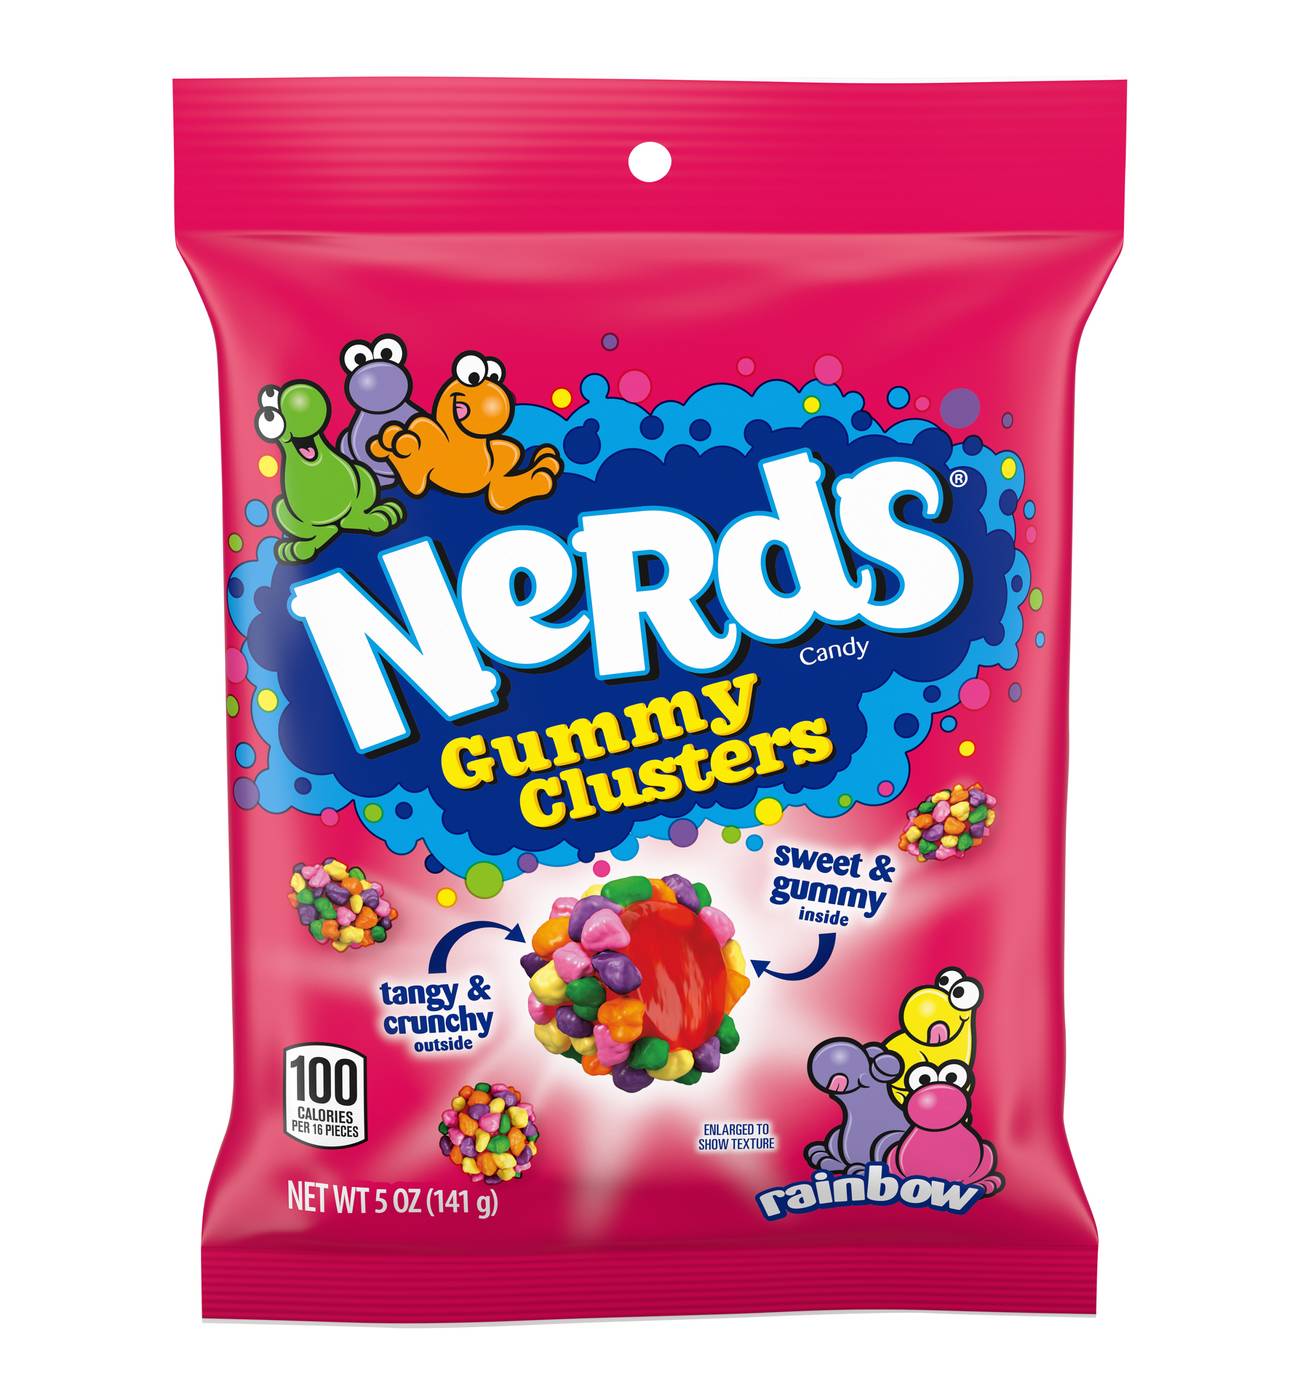 Nerds Rainbow Gummy Clusters Candy - Shop Candy at H-E-B